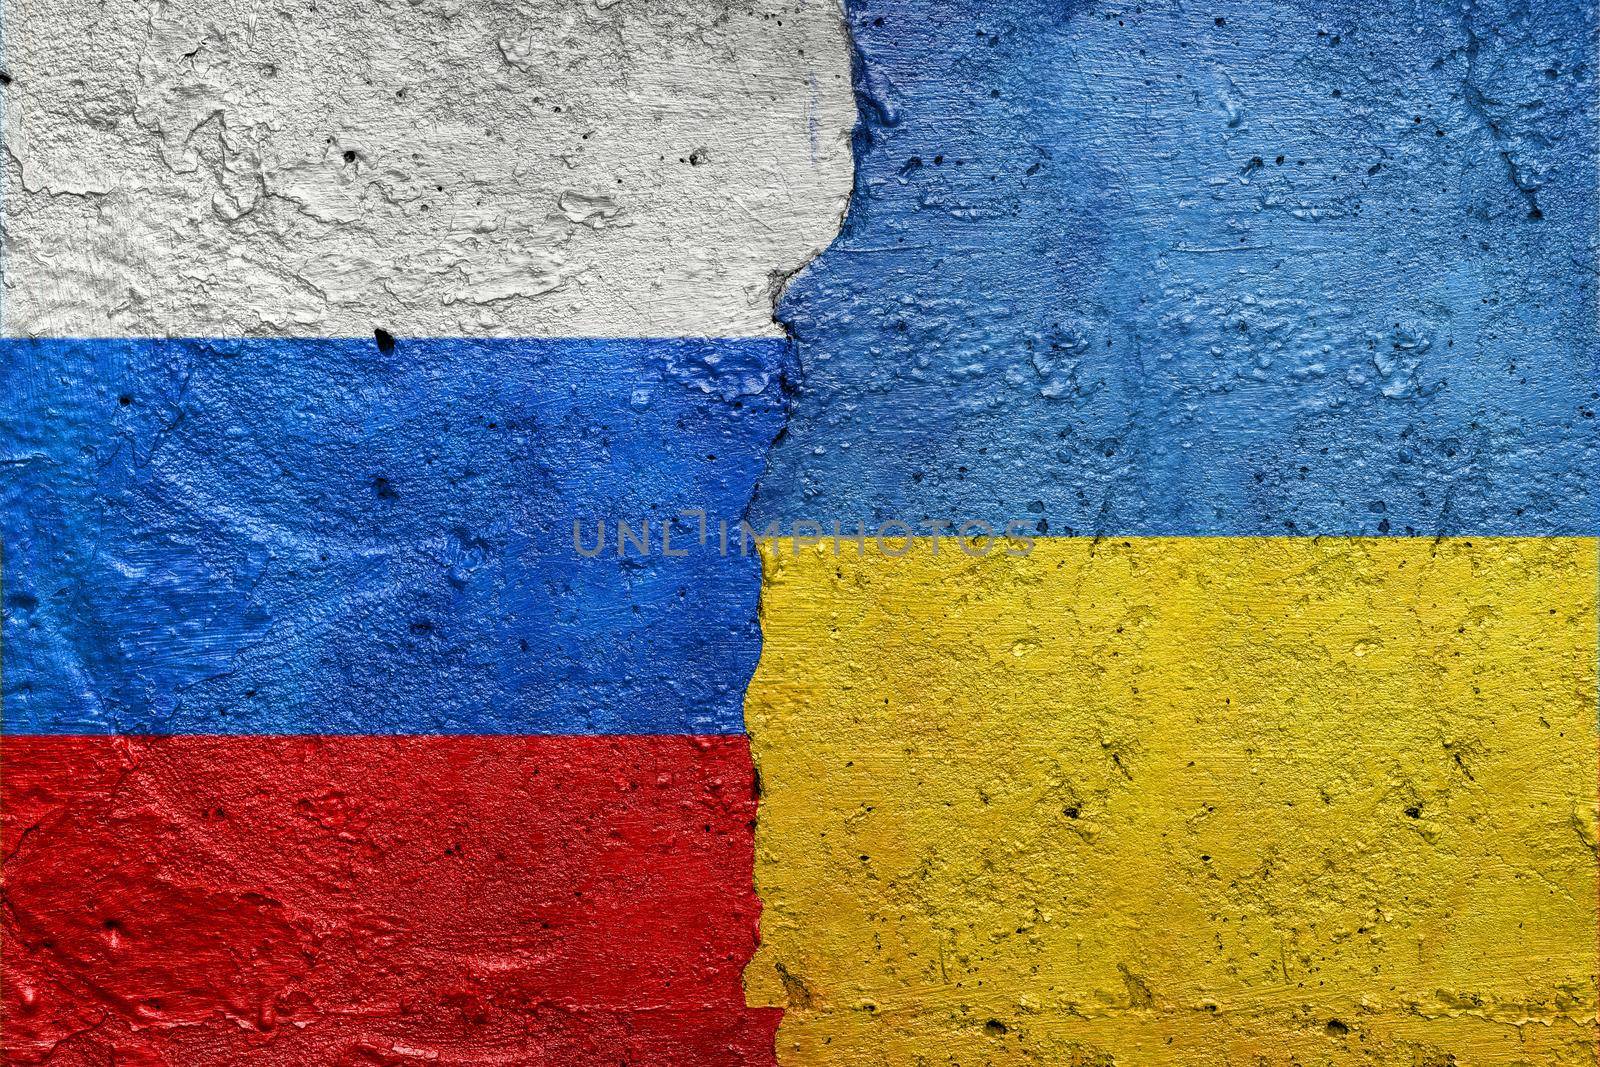 Russia vs Ukraine - Cracked concrete wall painted with a Ukrainian flag on the left and a Russian flag on the right stock photo by adamr